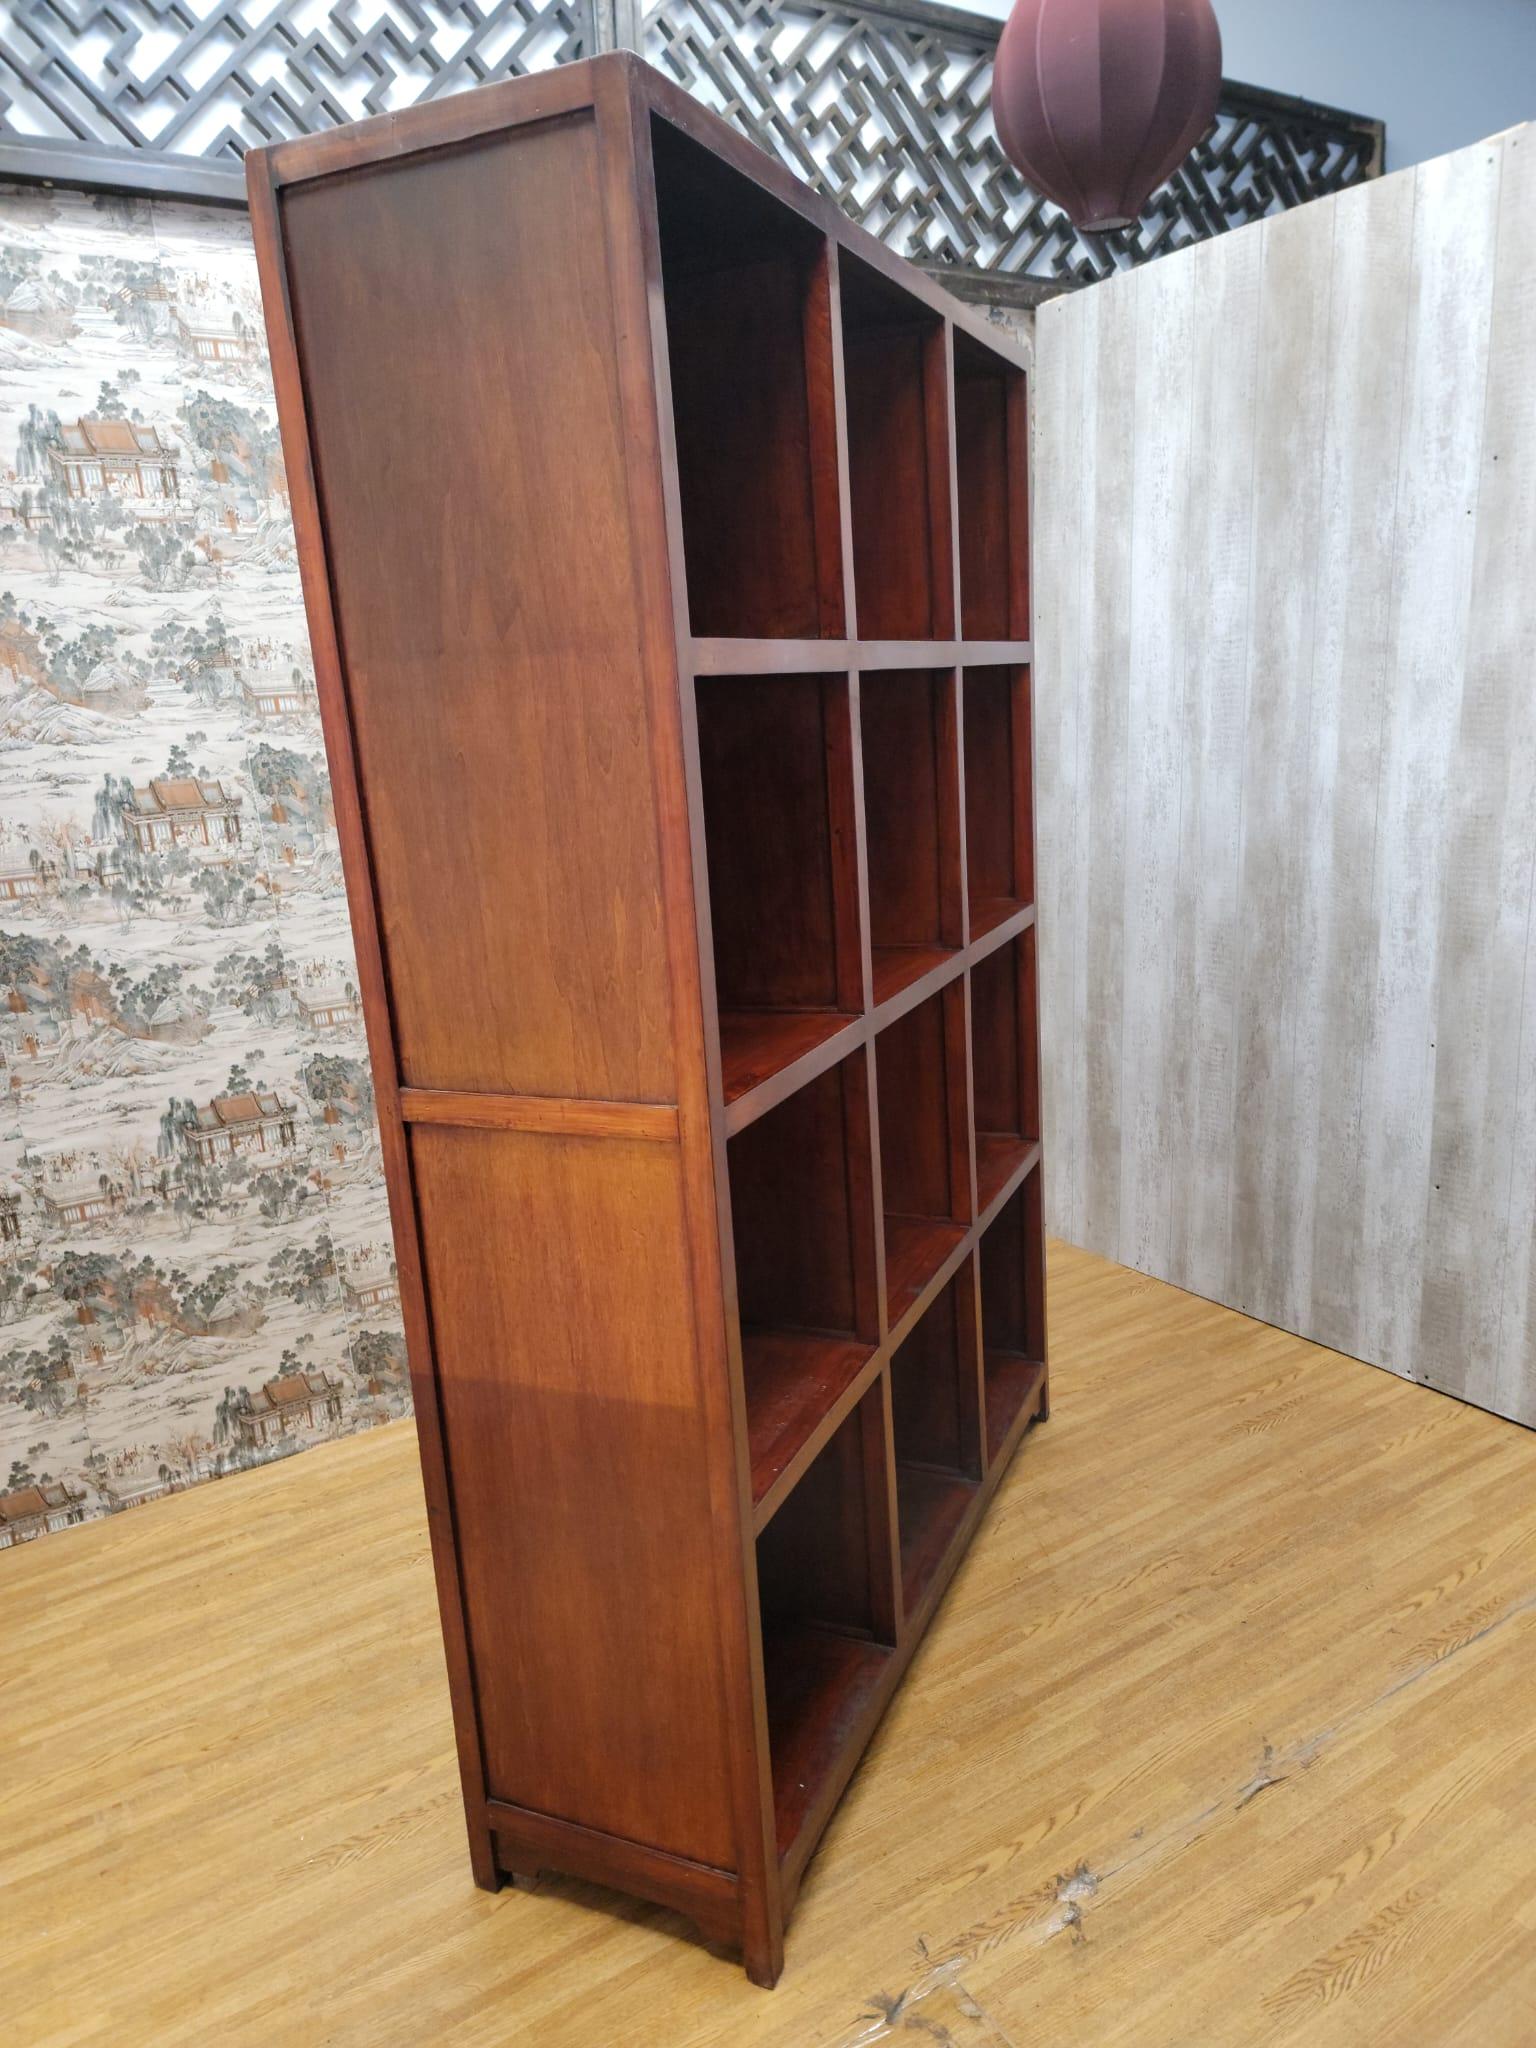 Vintage Chinese Red Lacquered Elmwood Cube Bookcase

This bookcase has 12 cubes and 3 shelves.

Circa: 1999

Dimensions:

W 59.5